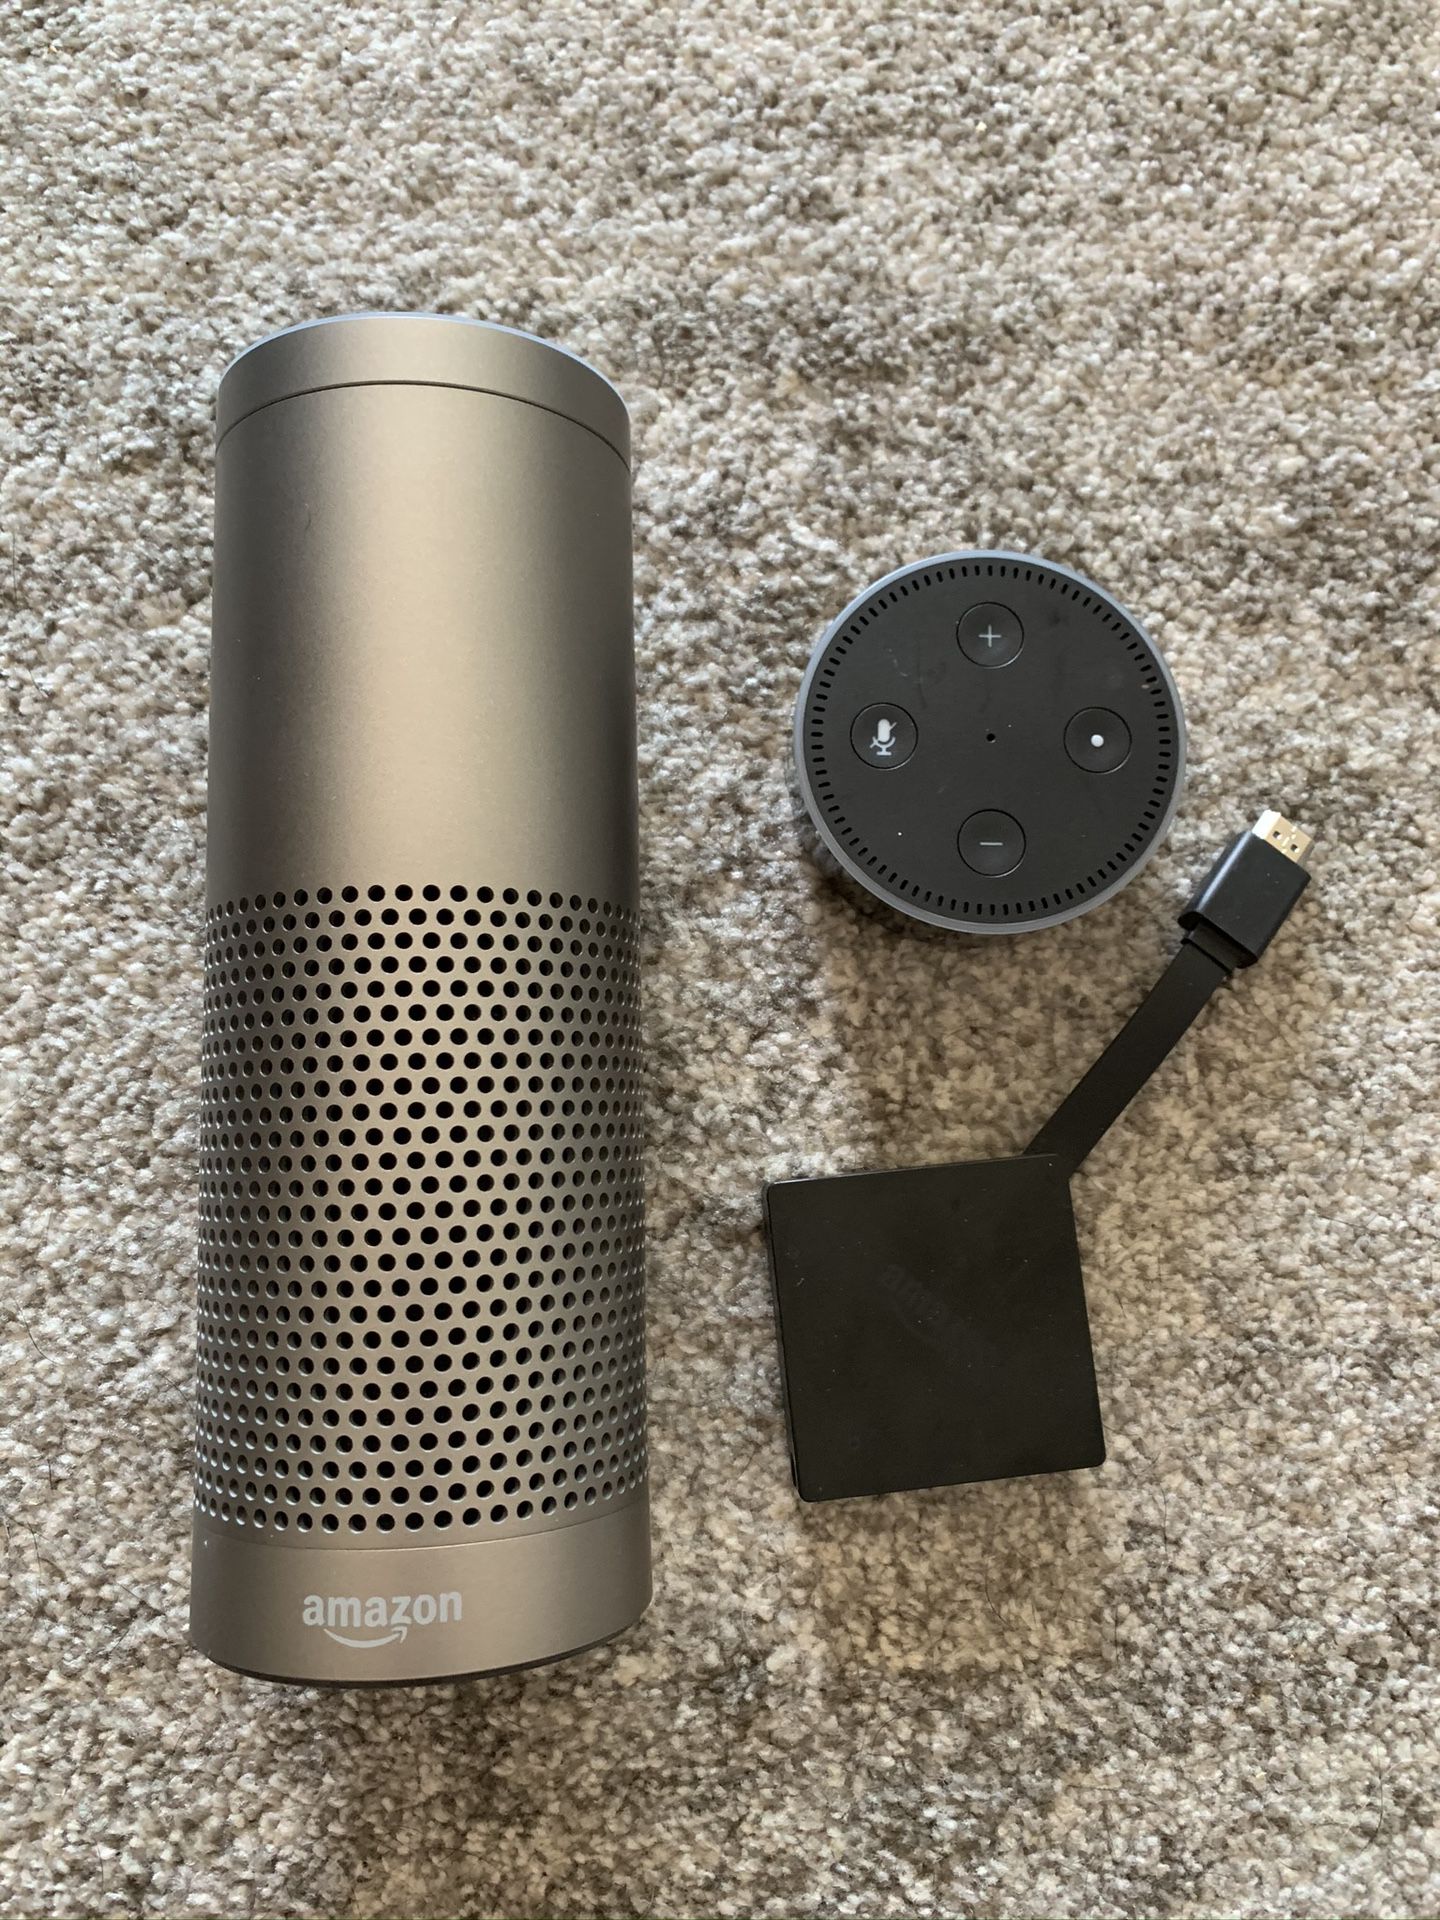 Amazon Echo Package with Echo Plus, Dot, and Fire TV 4K